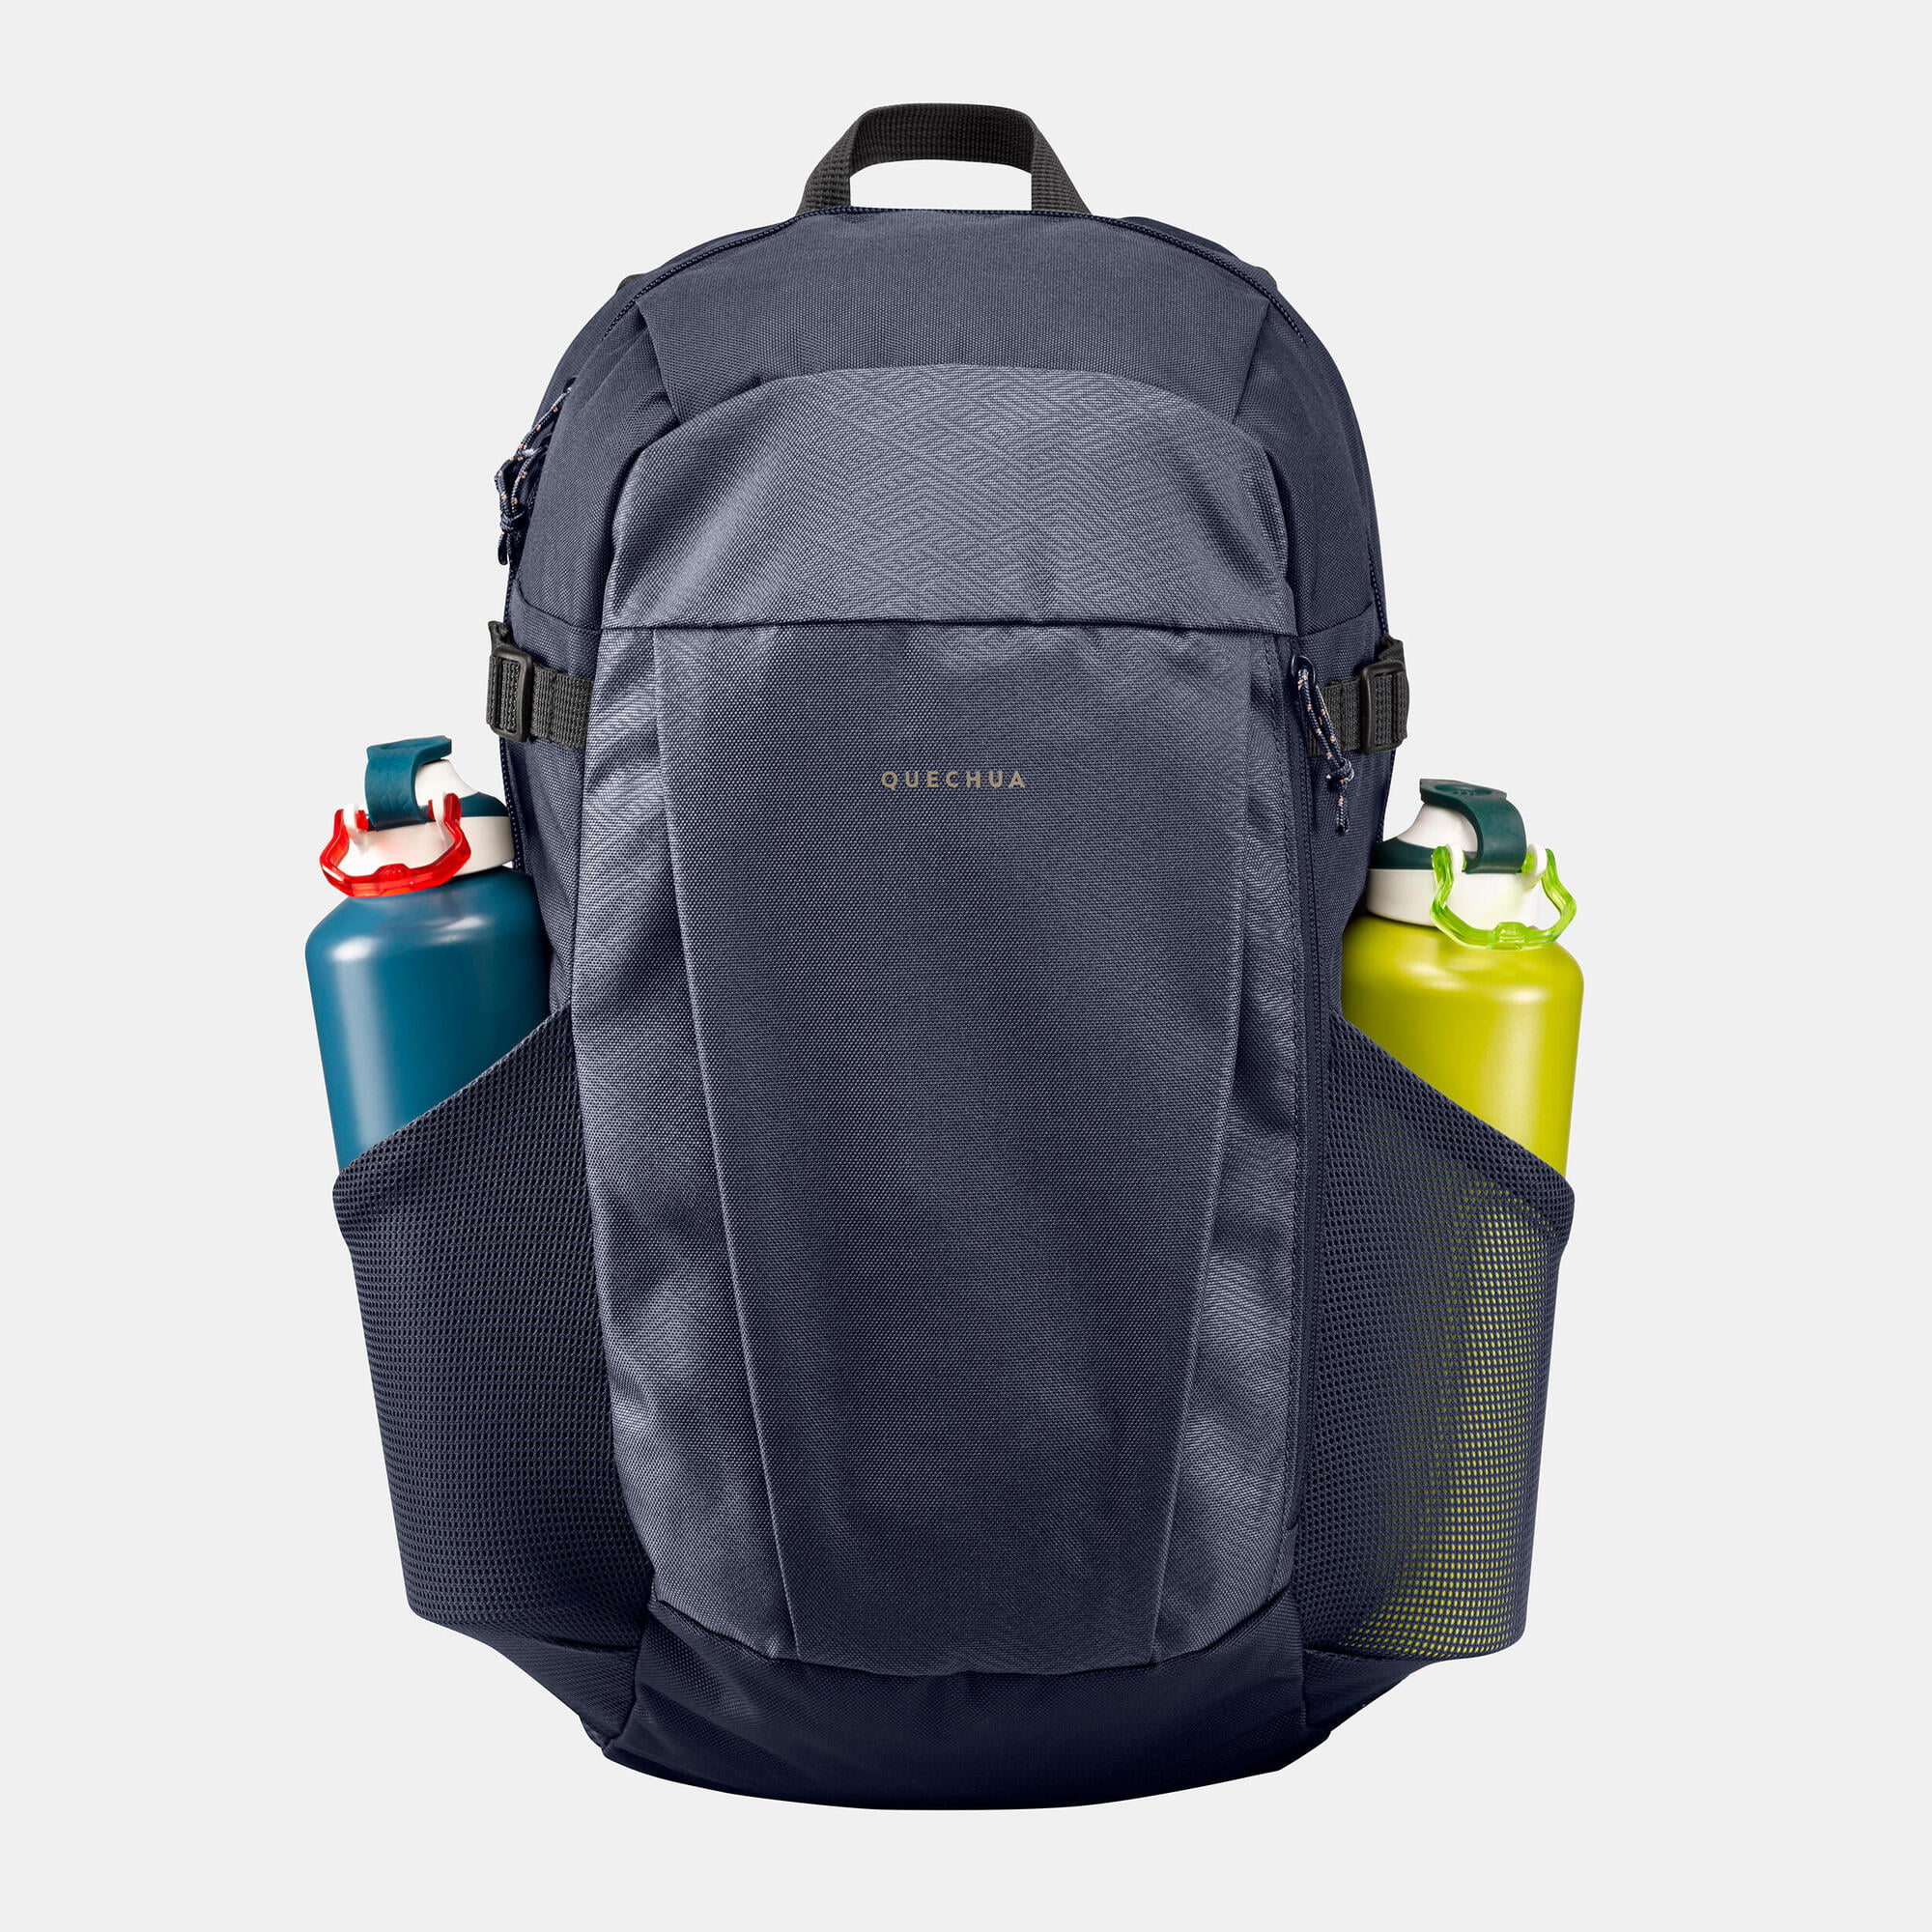 Quechua 20l Backpack in Delhi - Dealers, Manufacturers & Suppliers -Justdial